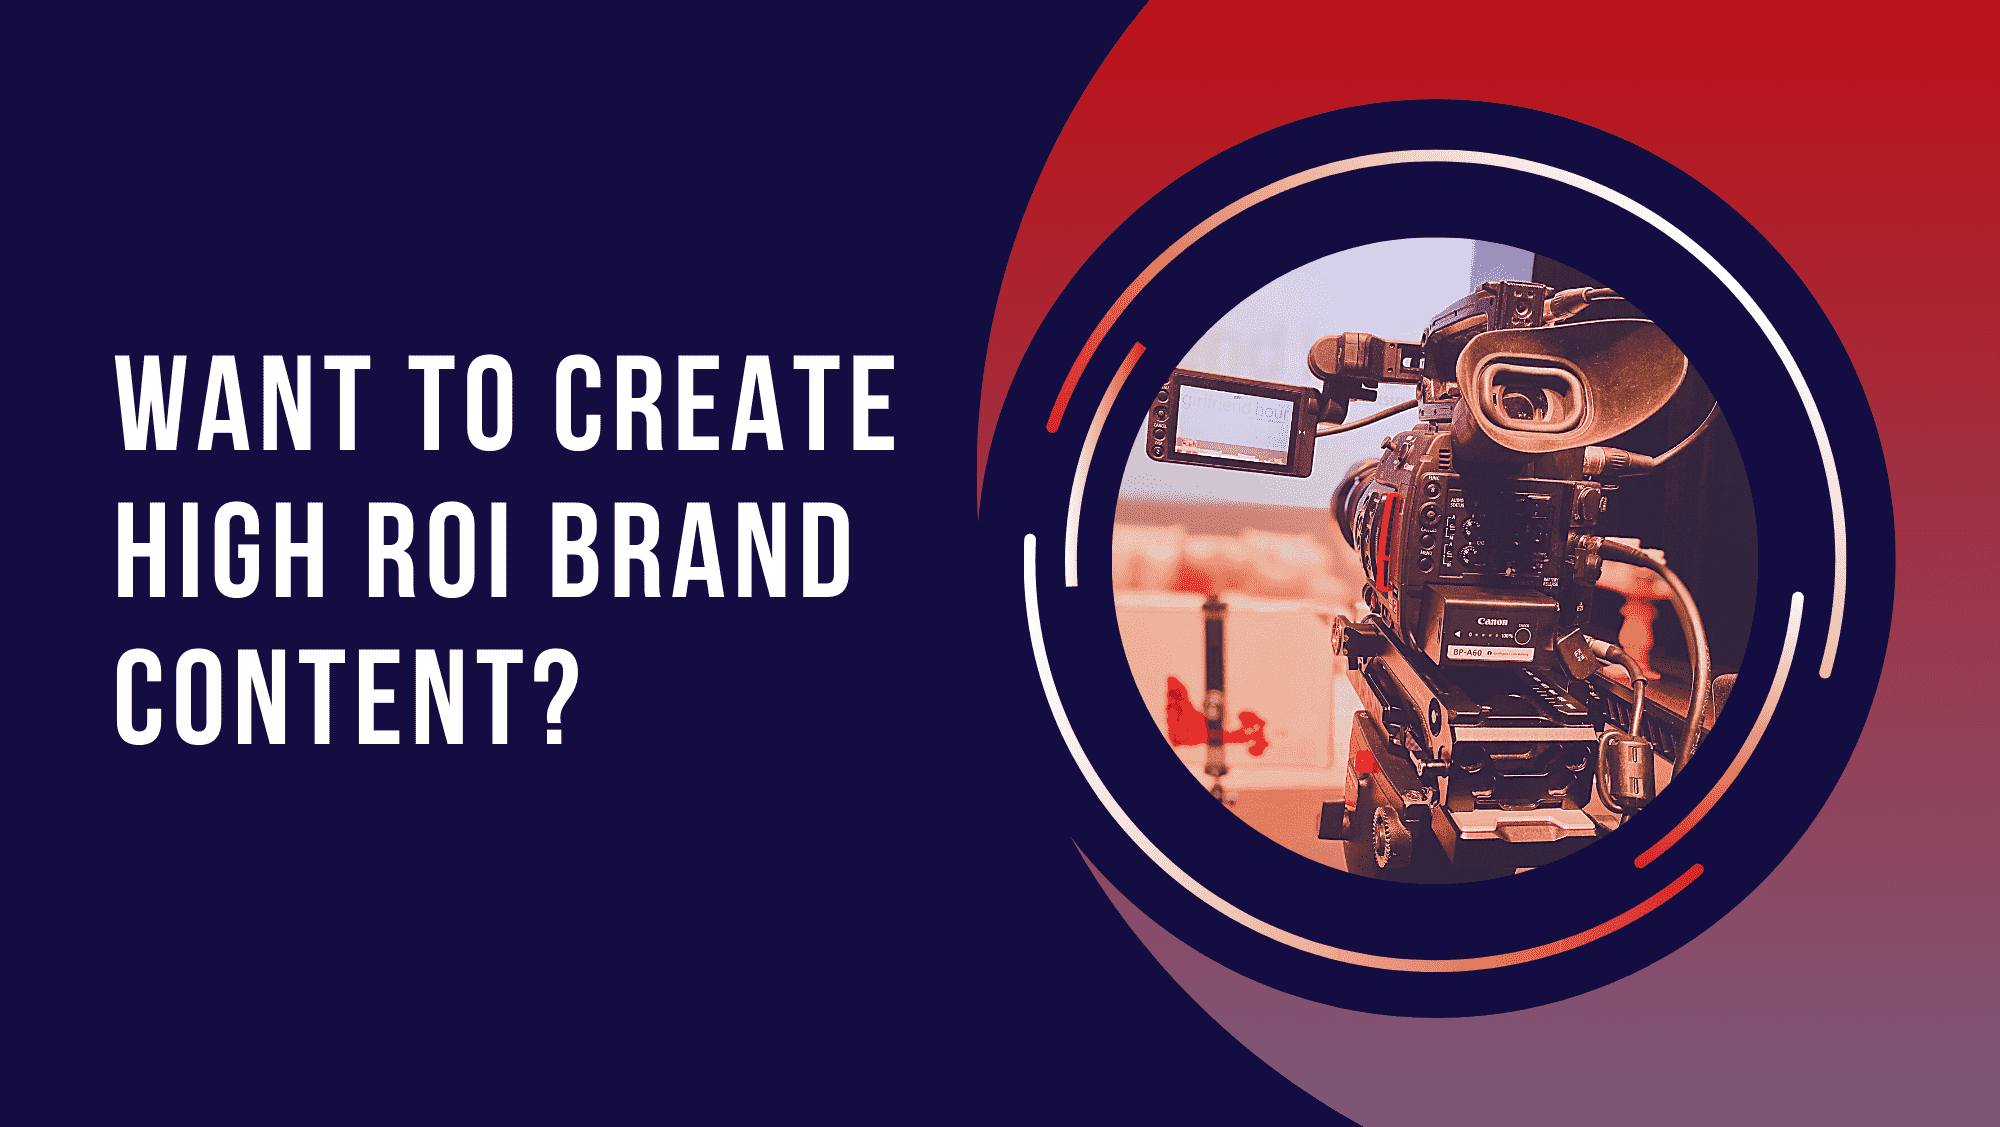 You are currently viewing Want to create high ROI brand content?